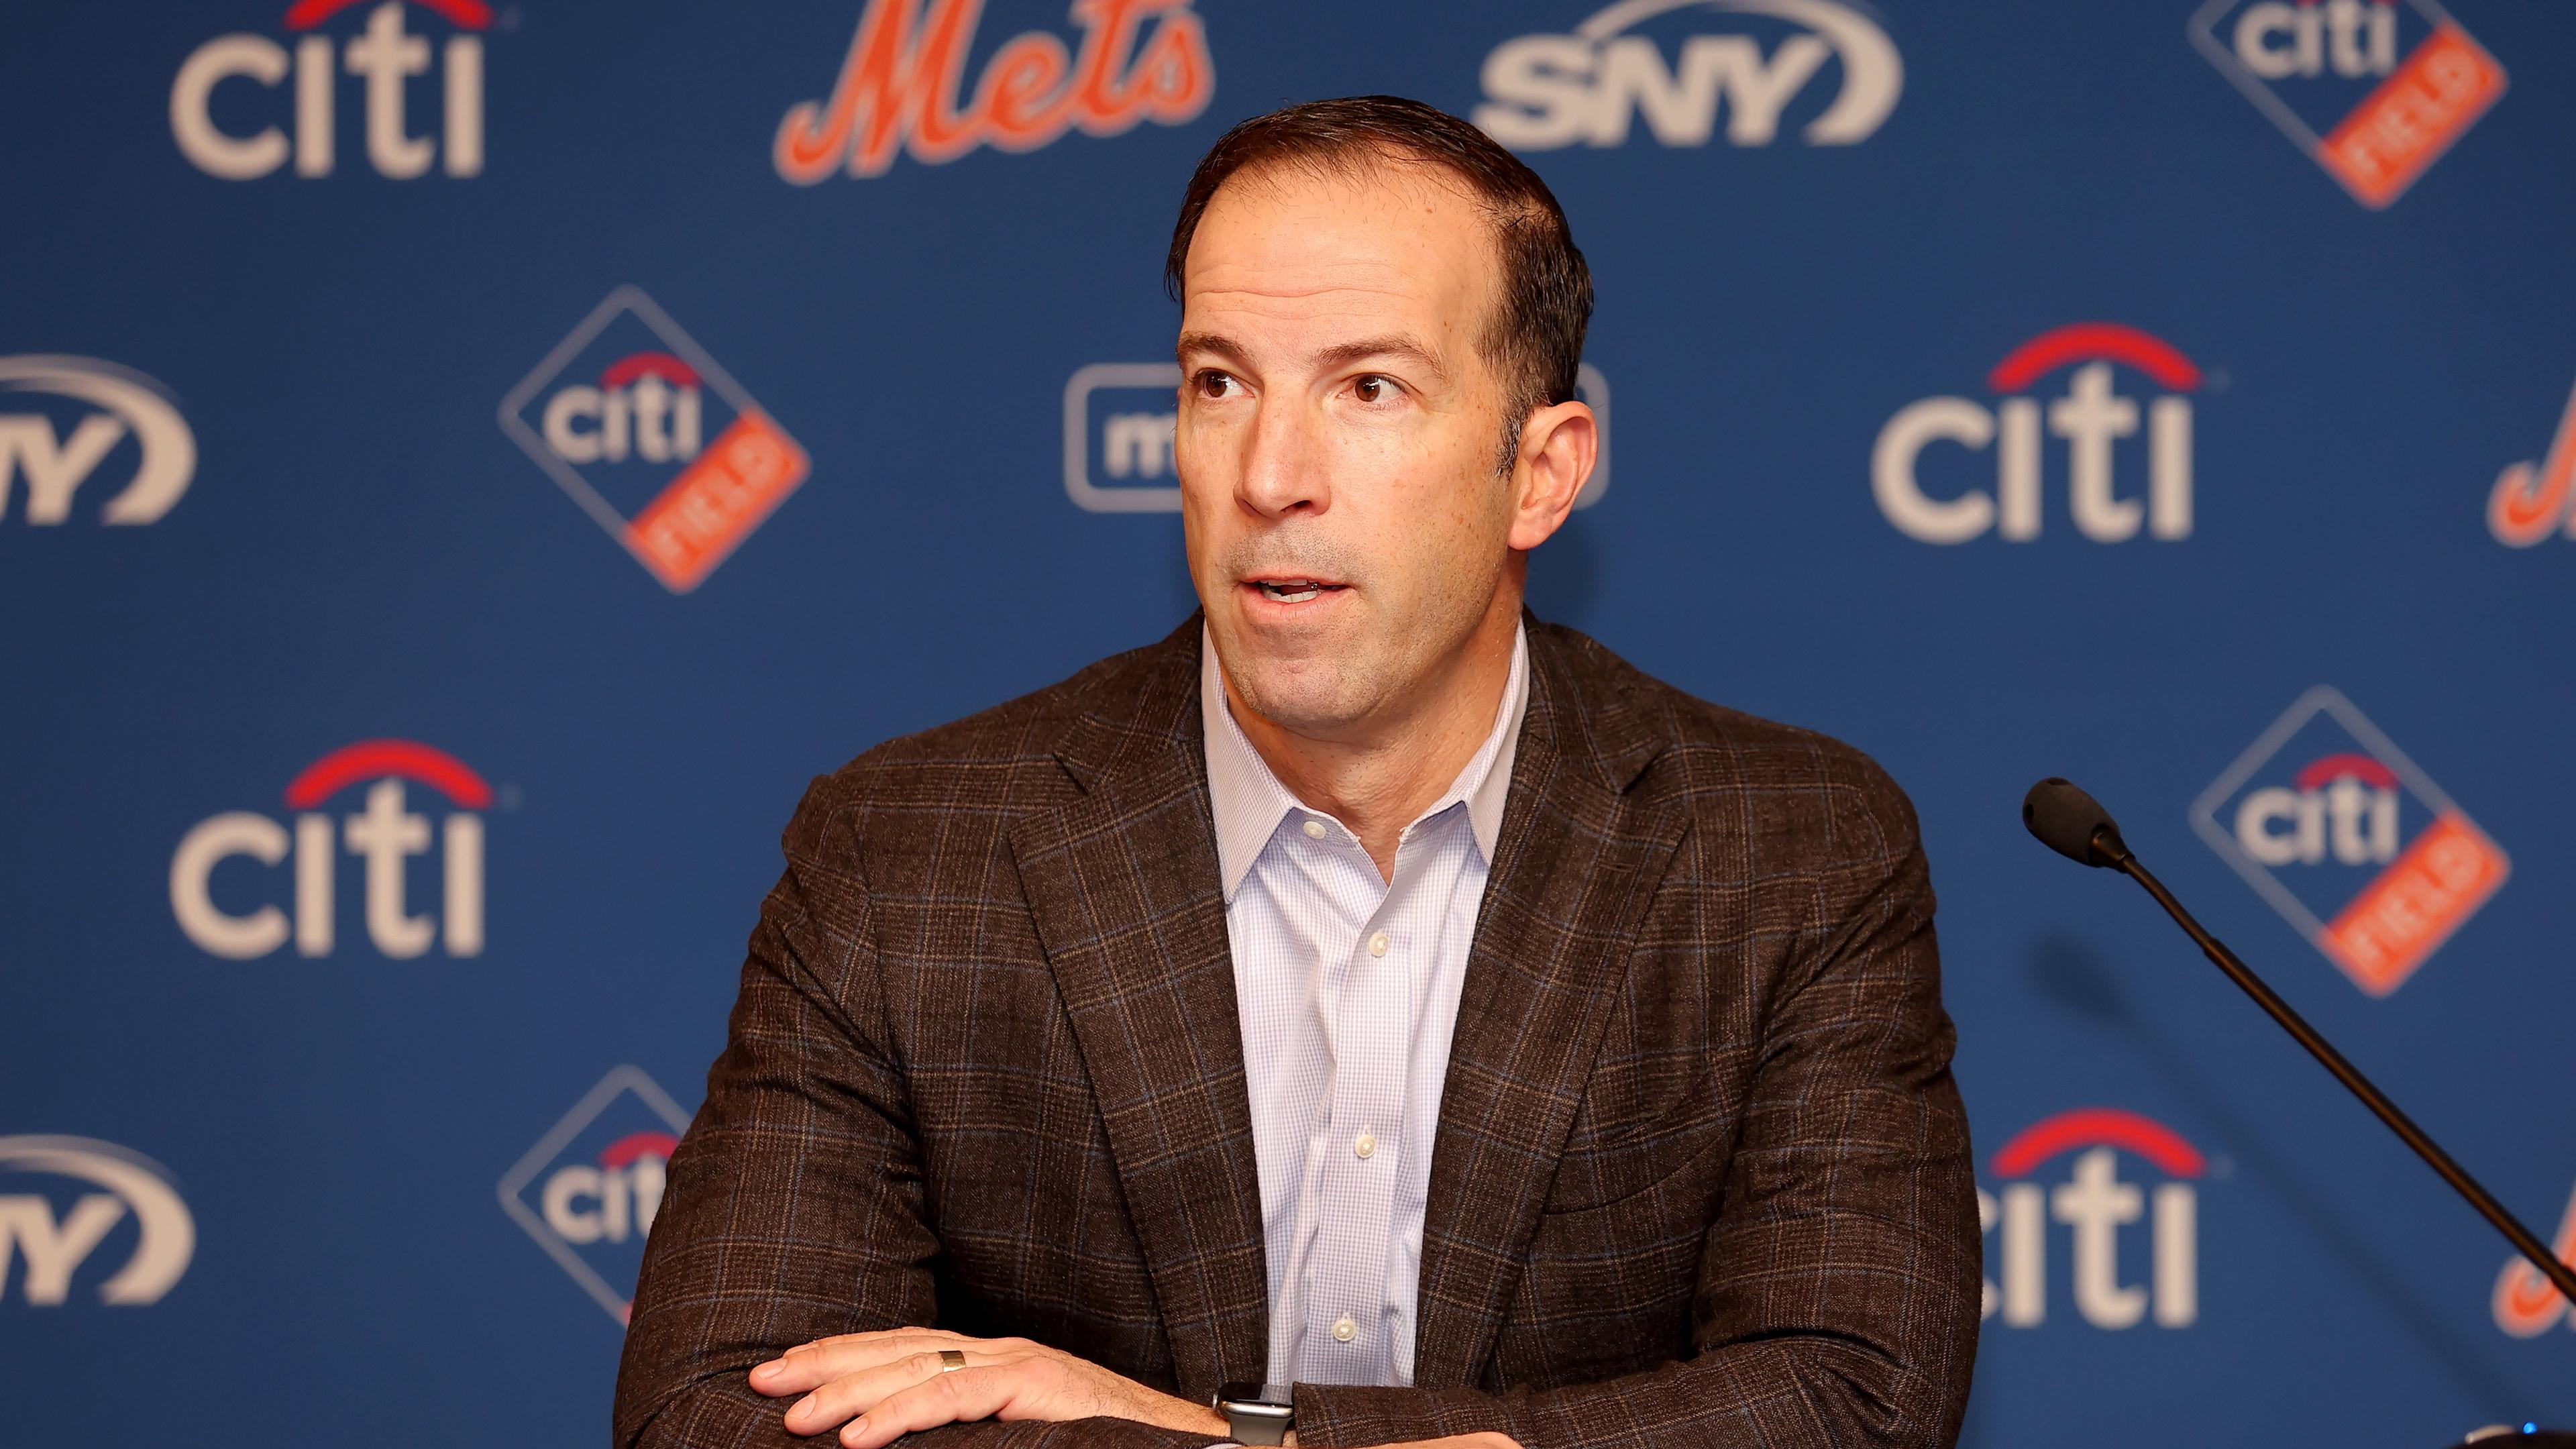 Dec 19, 2022; NY, NY, USA; New York Mets general manager Billy Eppler introduces pitcher Kodai Senga (not pictured) during a press conference at Citi Field. Mandatory Credit: Brad Penner-USA TODAY Sports / © Brad Penner-USA TODAY Sports